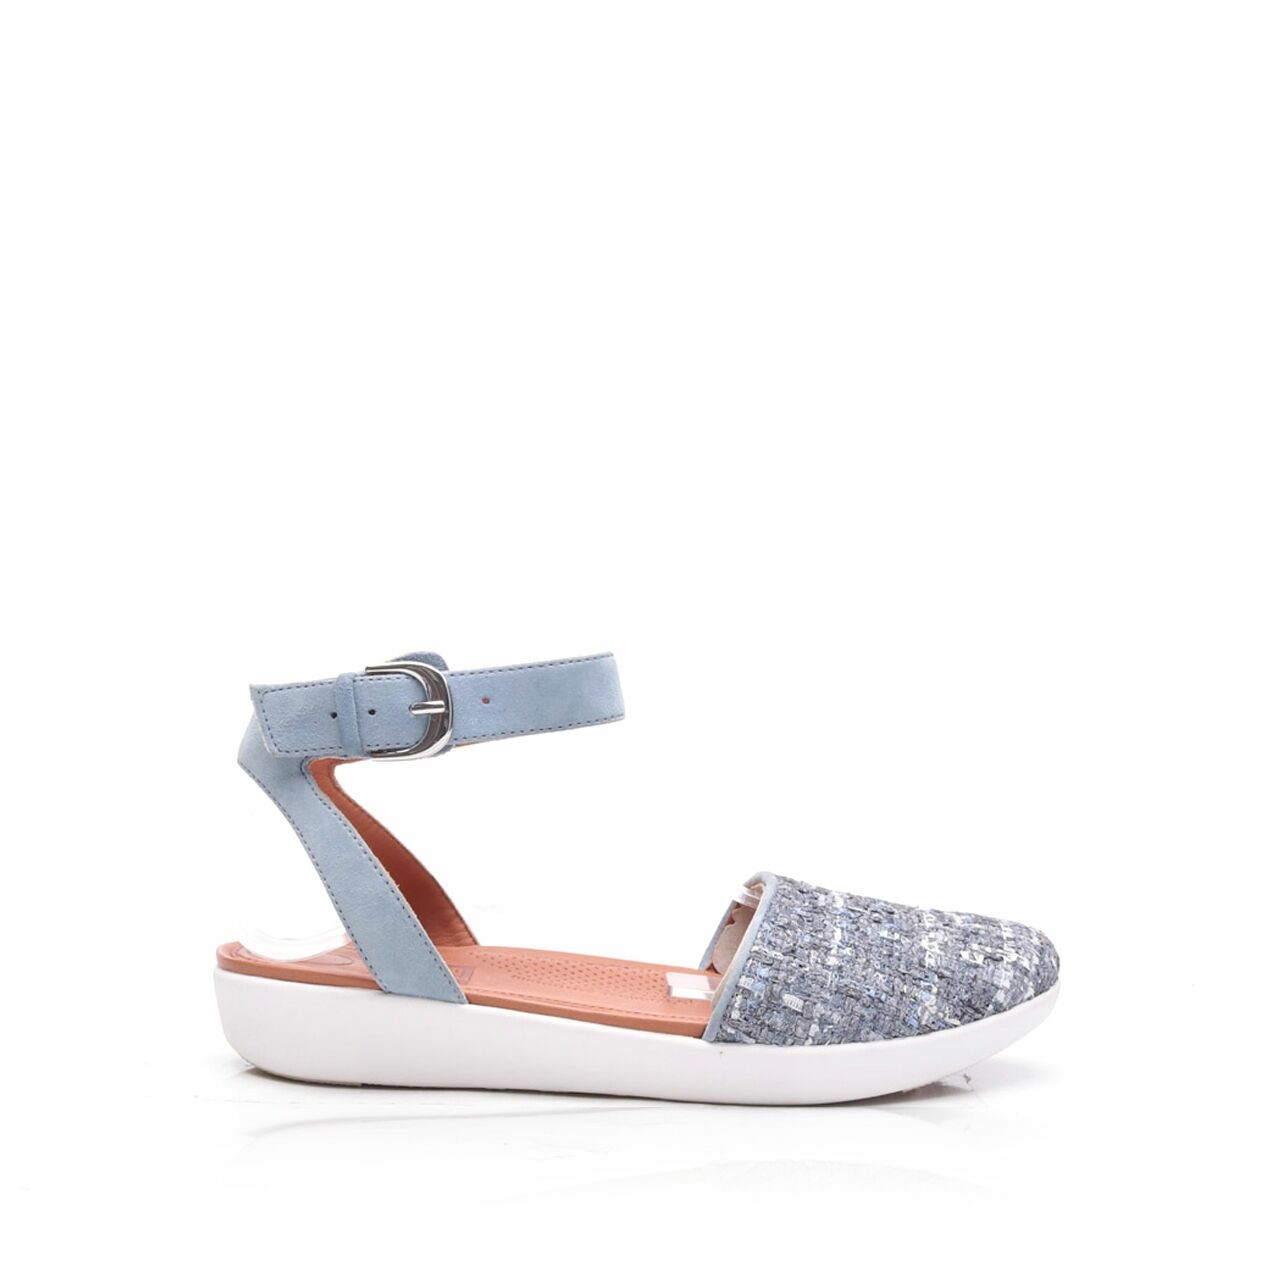 Fitflop Blue Sandals